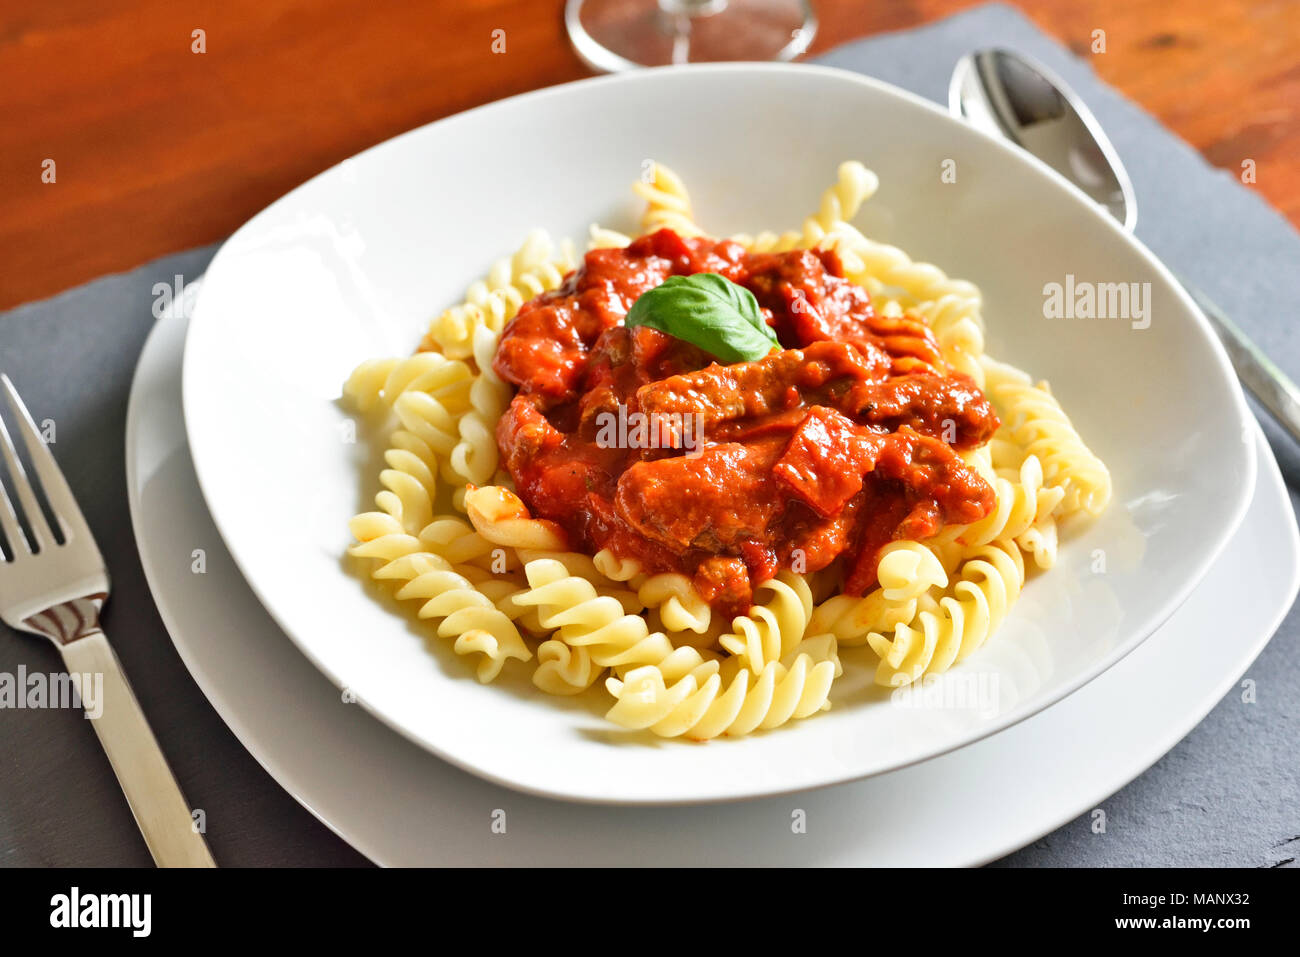 Delicious goulash dish with spiral noodles or pasta on a white plate. Eating scene with hungarian dish. Stock Photo